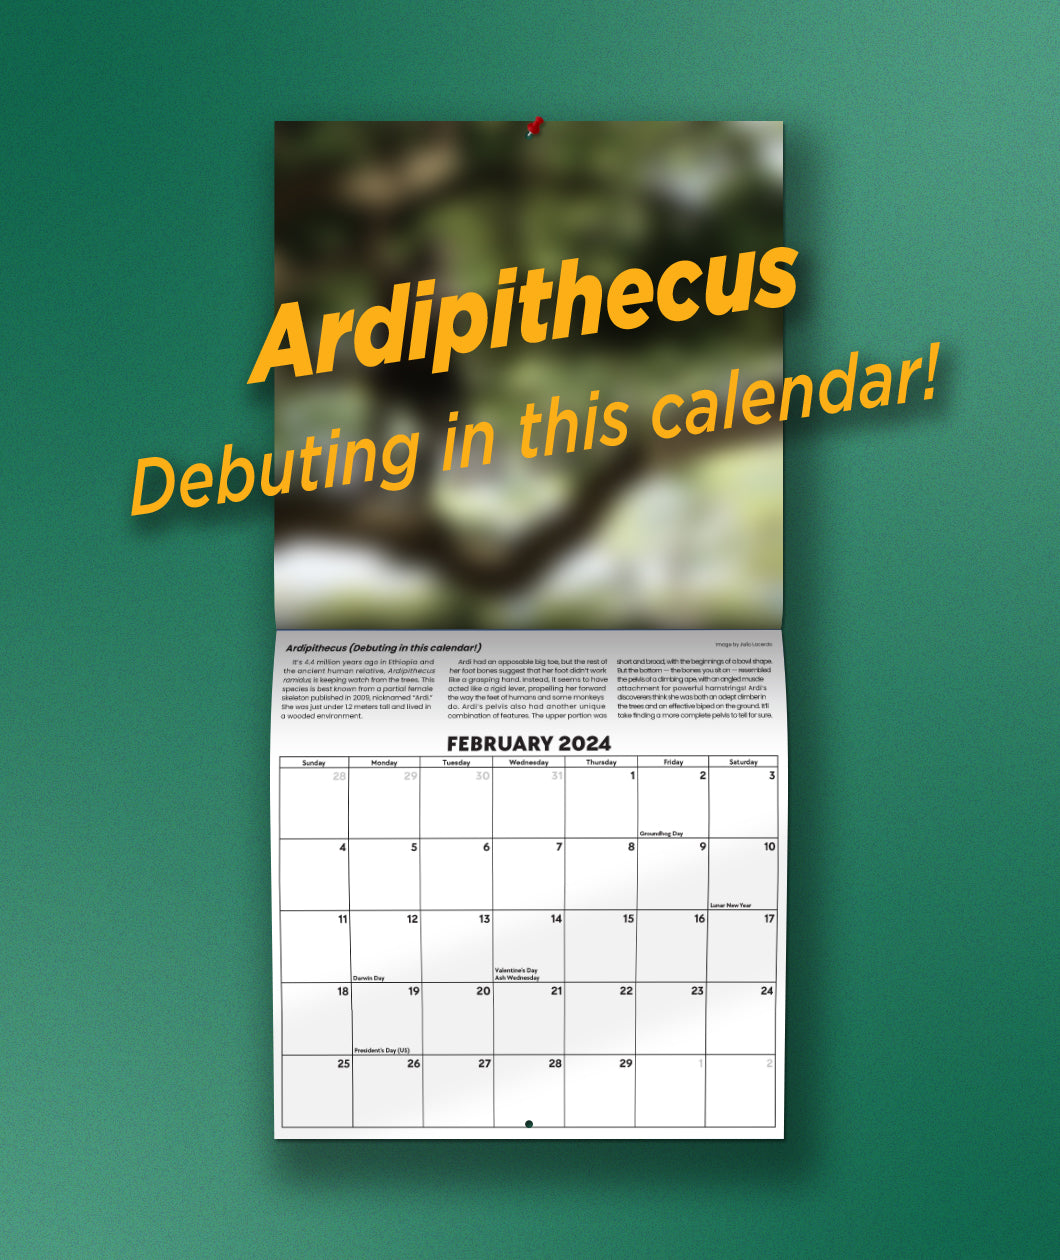 The February page of the Eons 2024 Calendar in front of a green background. The image is blurred with text that says "Ardipithecus Debuting in this calendar!".